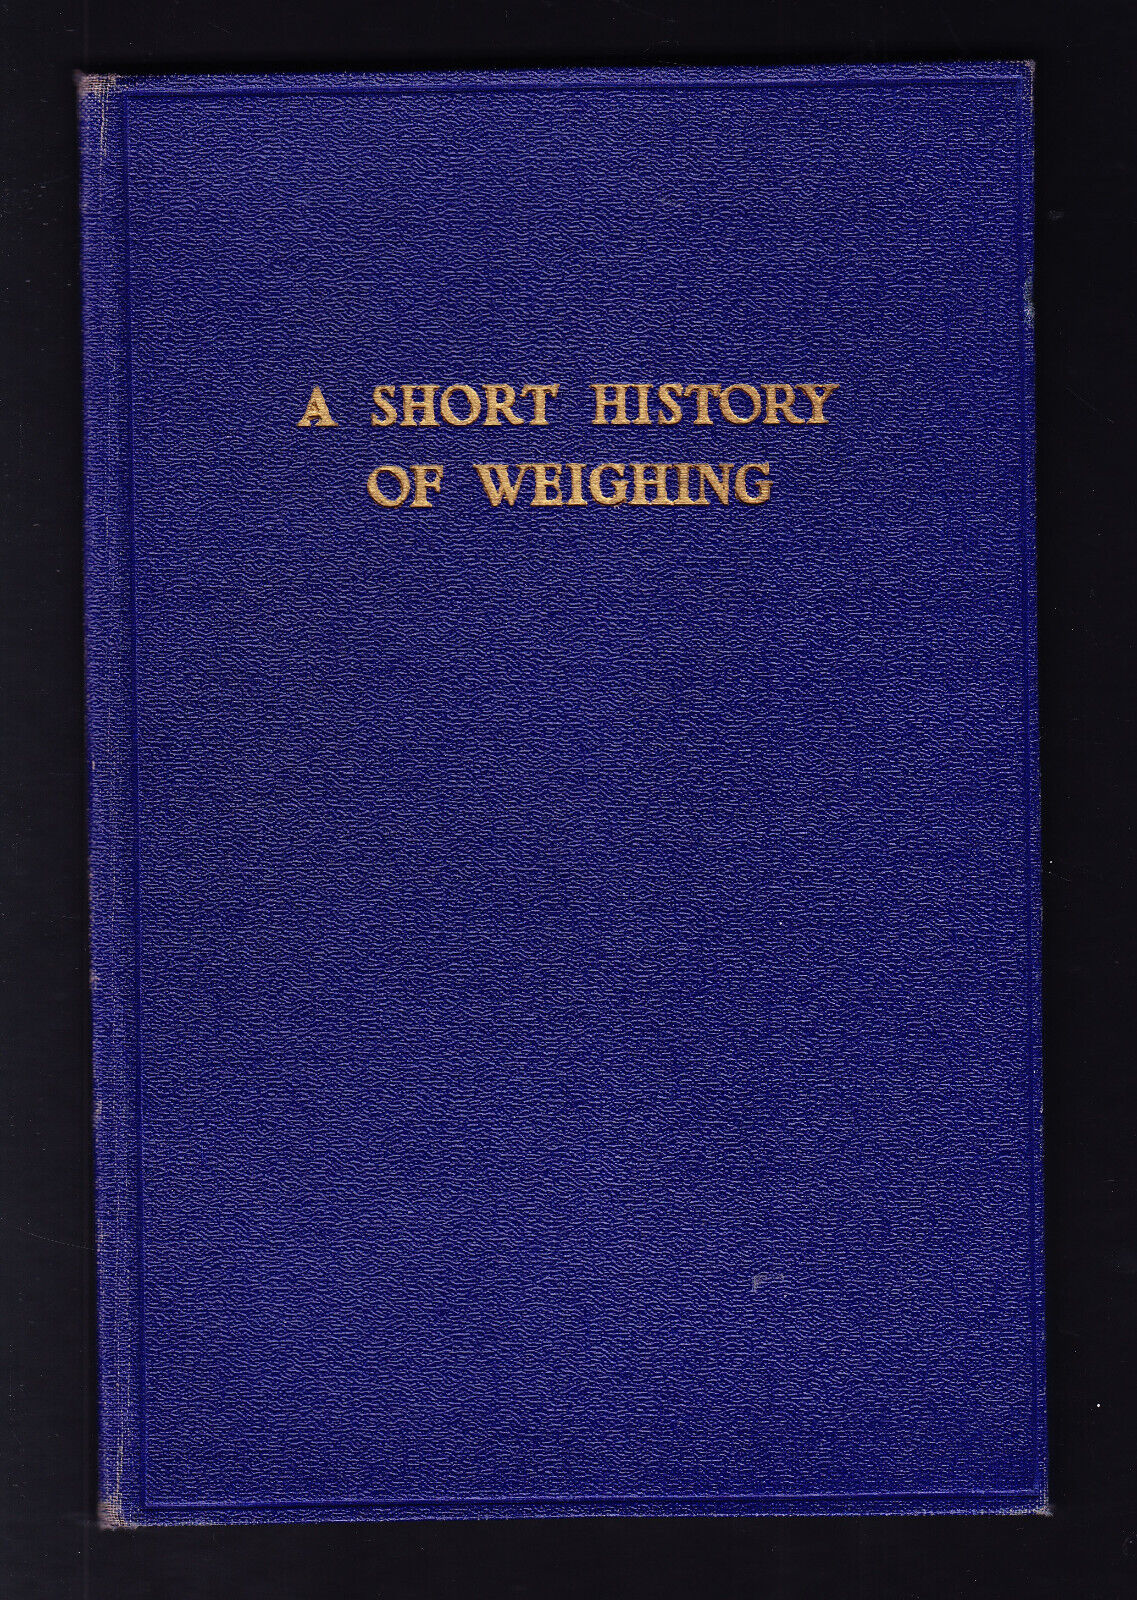 AVERY LTD A Short History of Weighing by L Sanders 1947 1st Ed HARDBACK